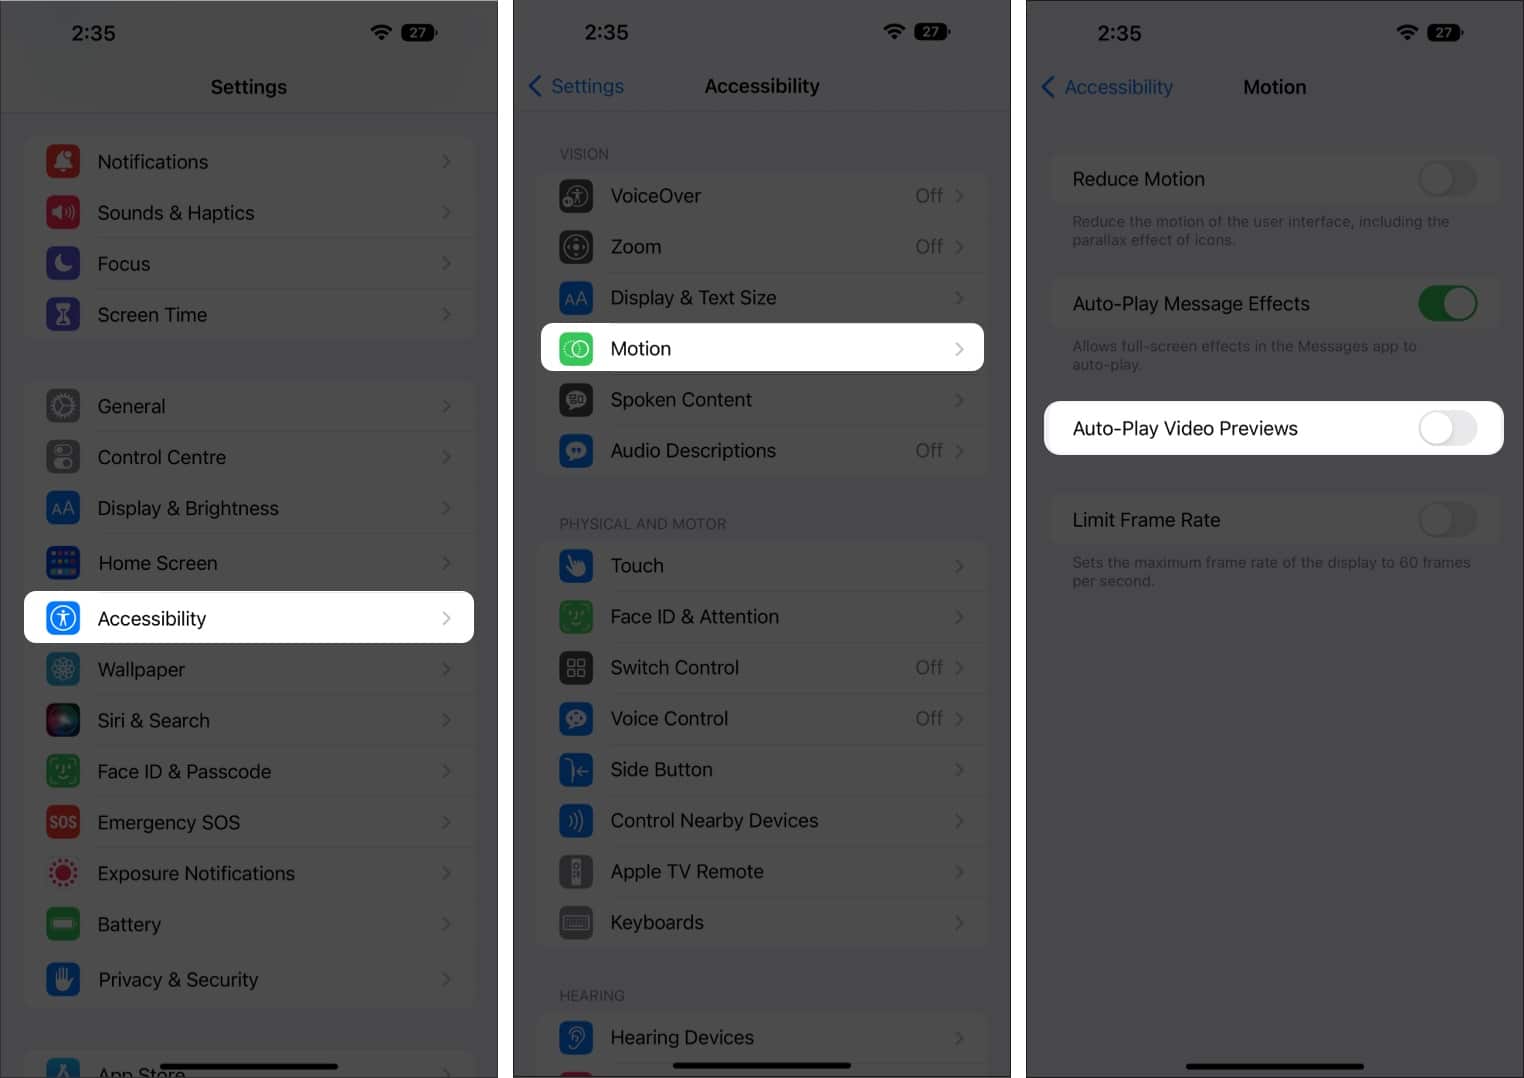 Steps to turn off Auto-Play Video Previews in iPhone Accessibility settings